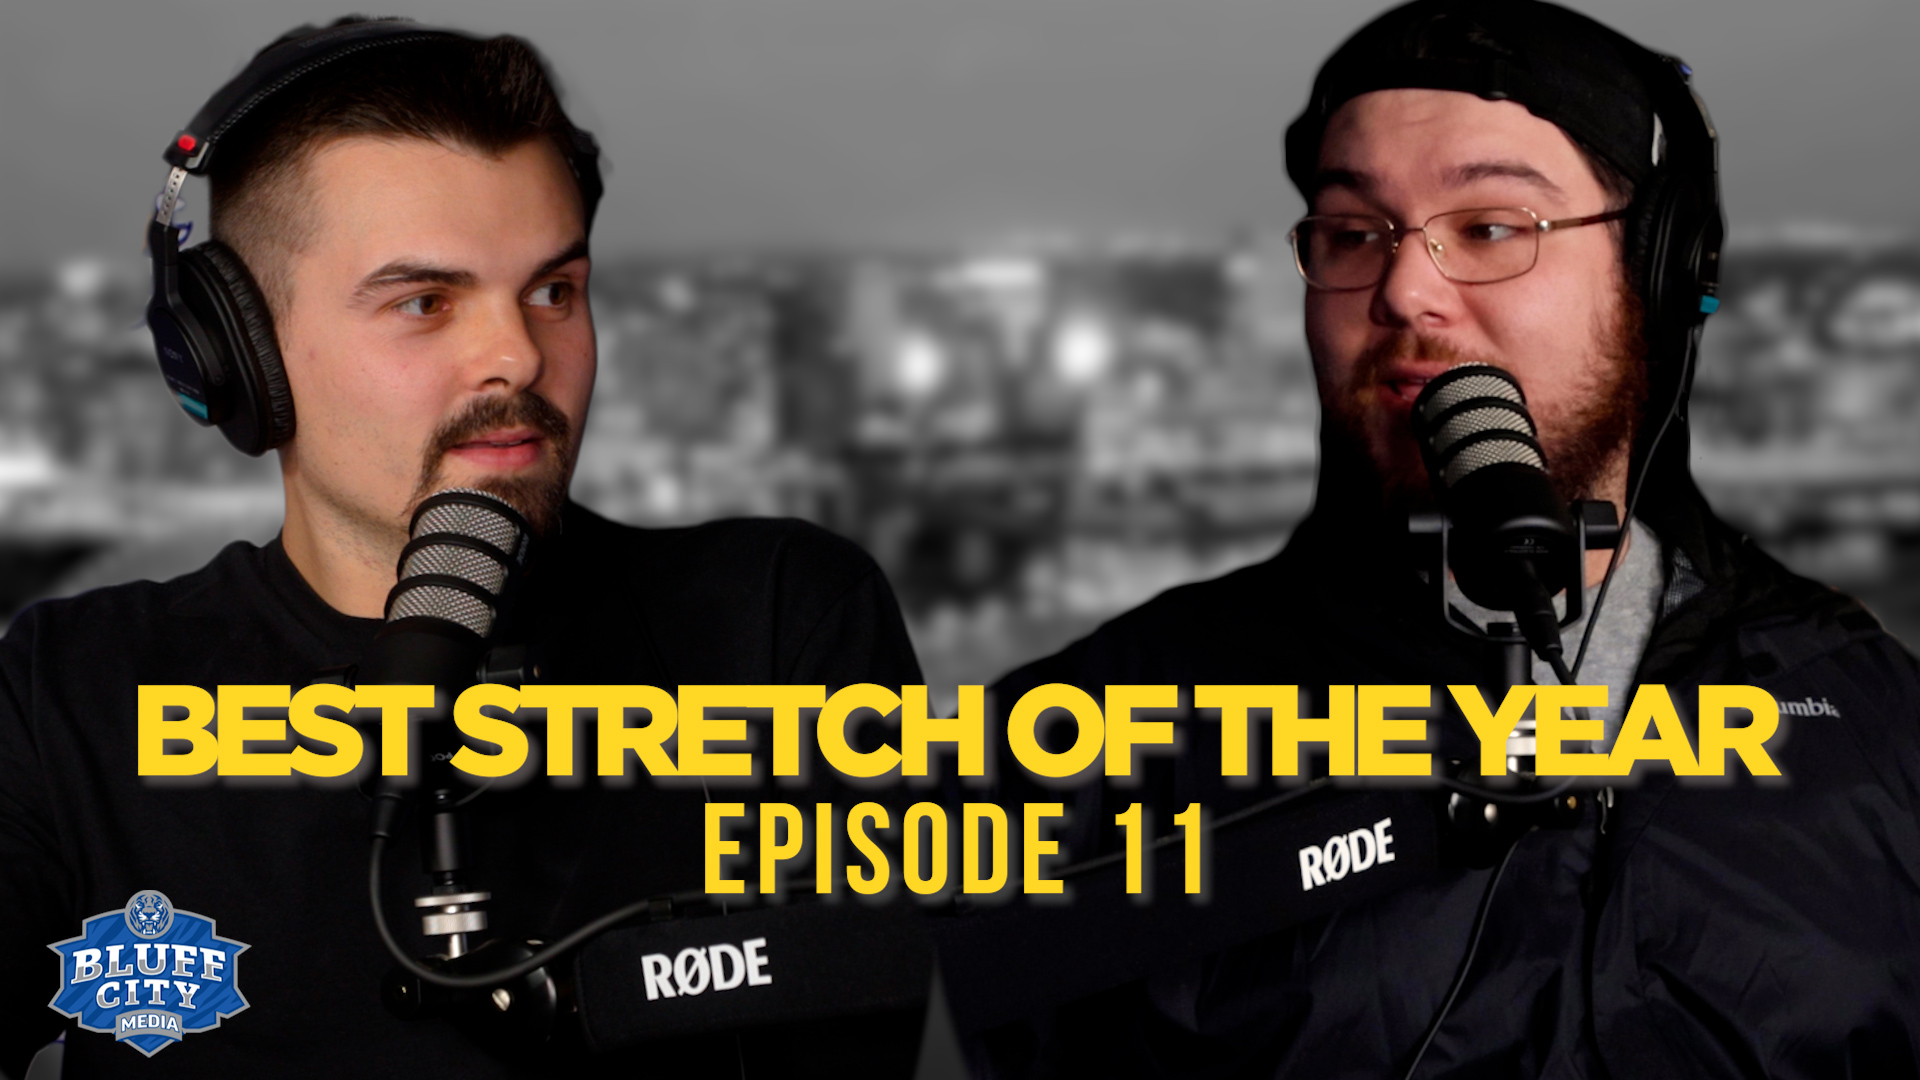 Featured image for “On the Bluff Episode 11: The Best Stretch of the Year”